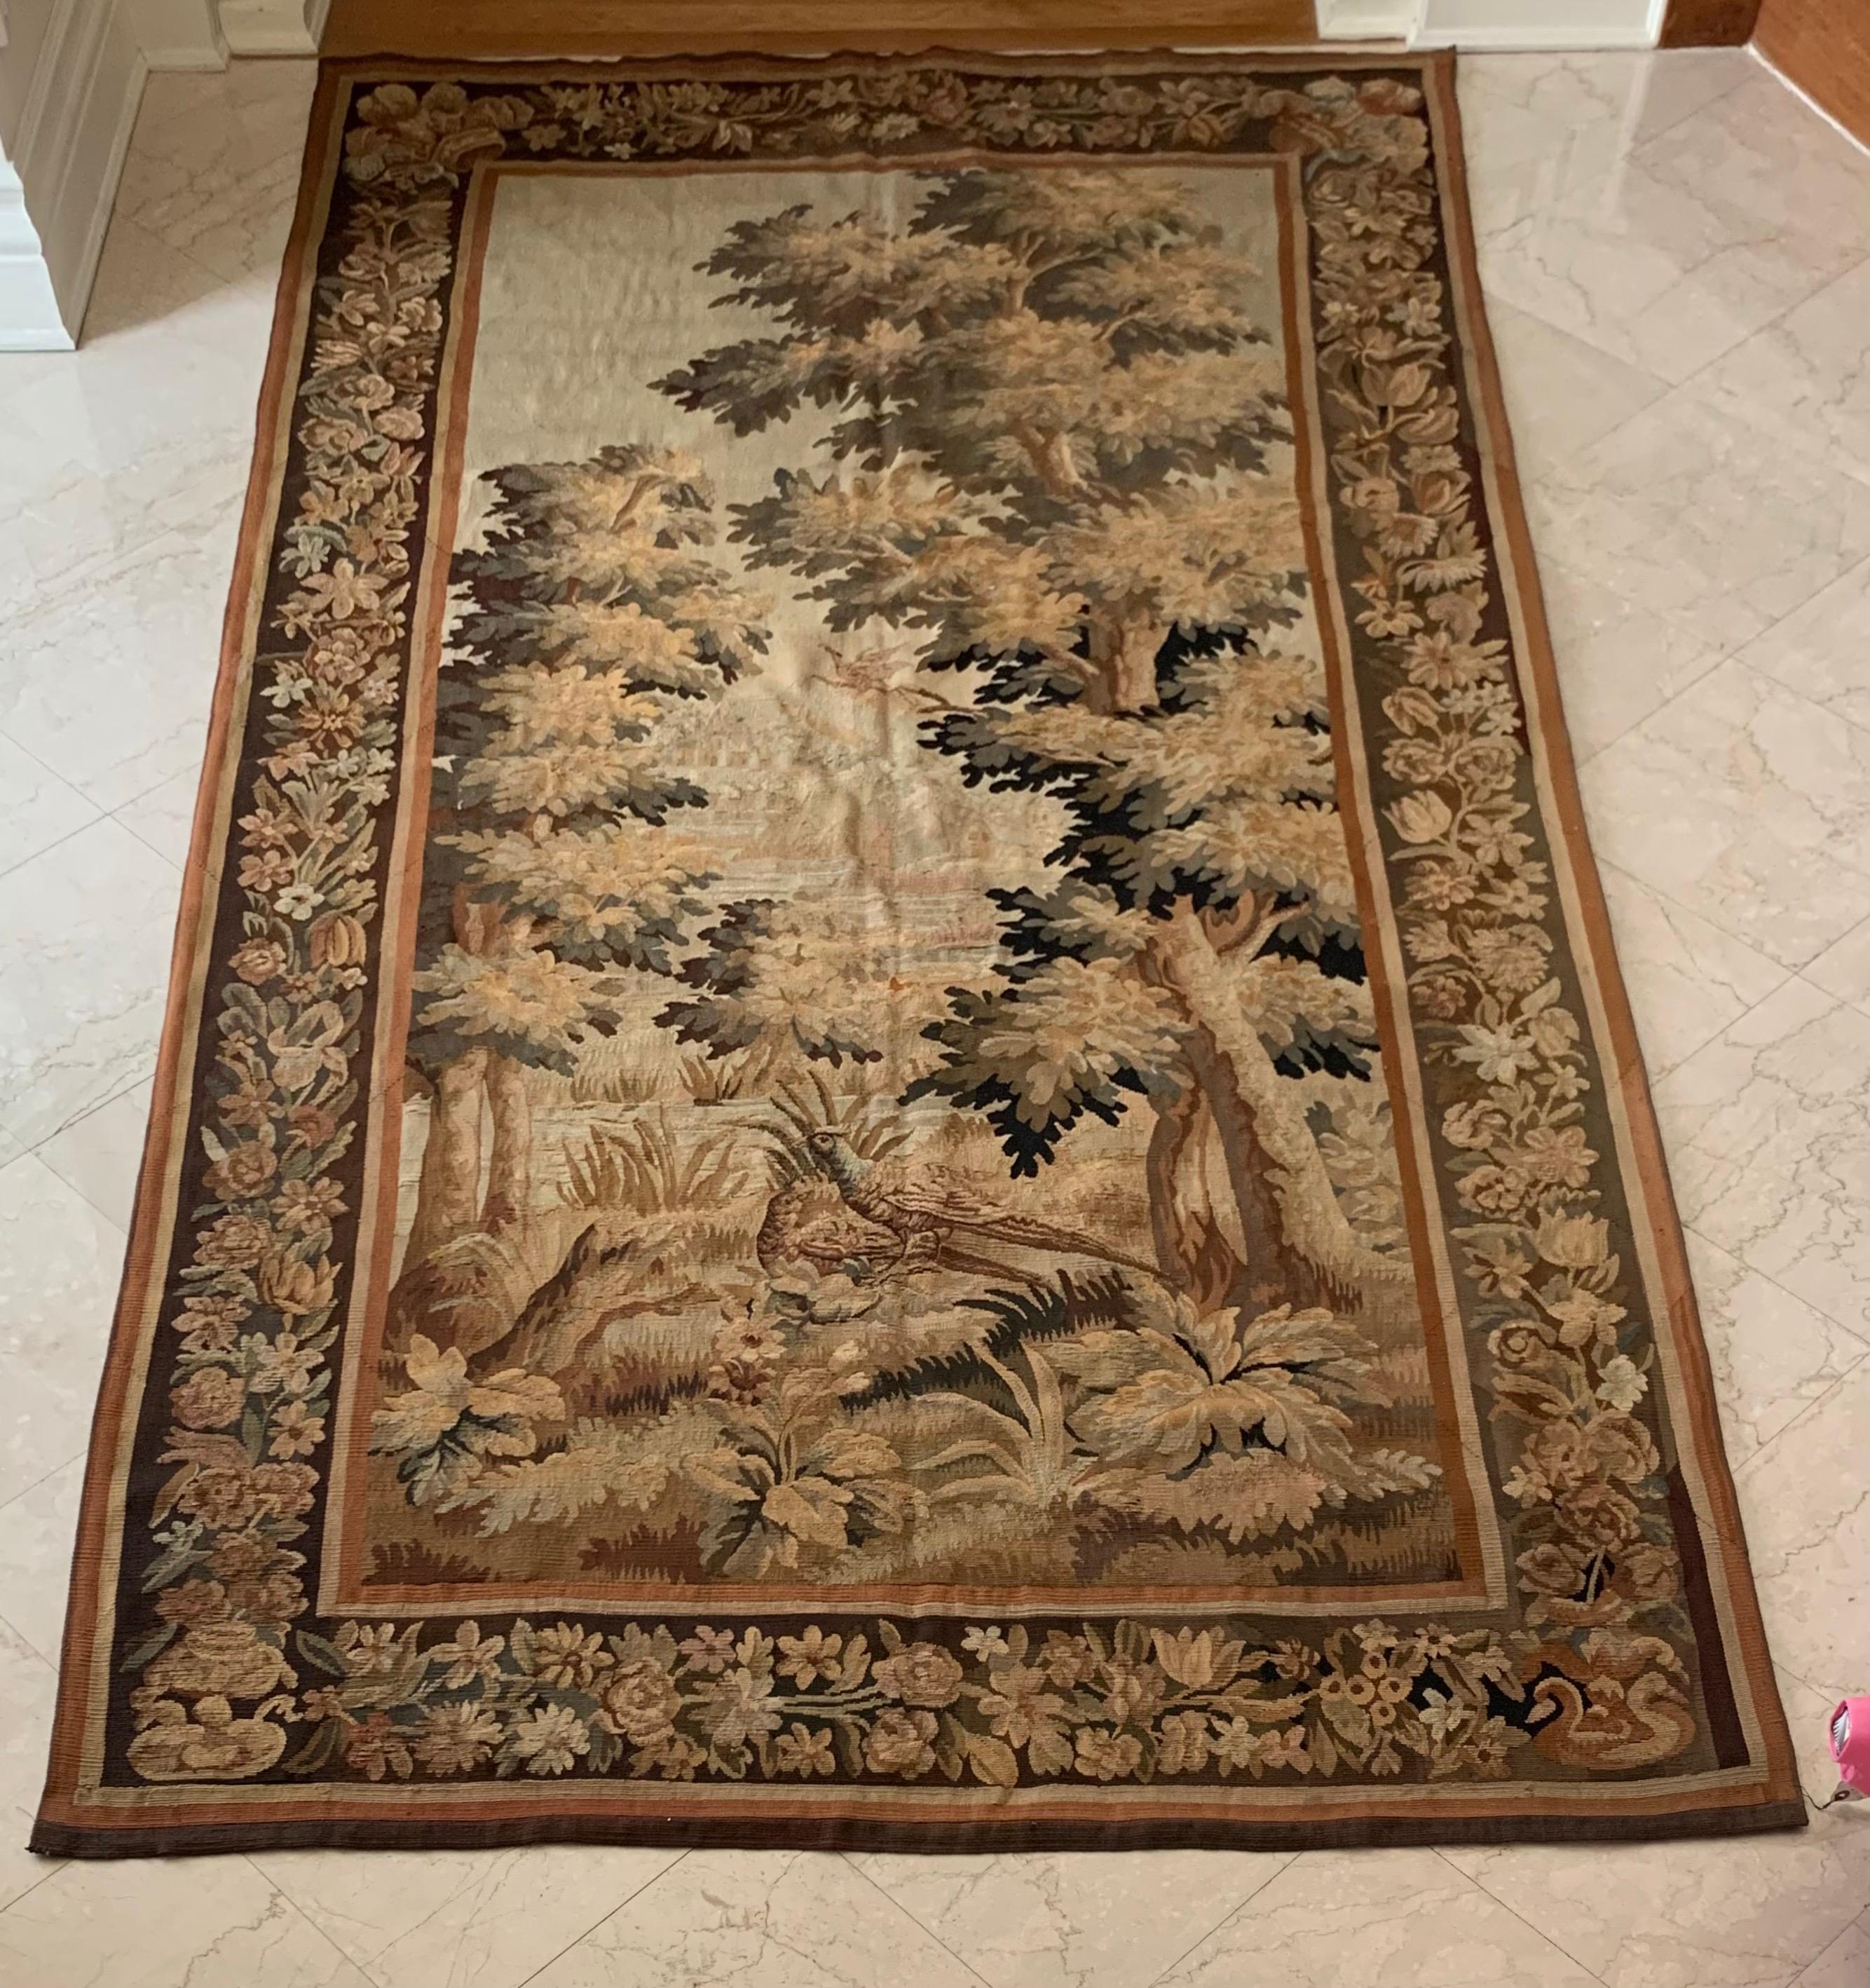 This is a lovely antique 19th century French Verdure Landscape Tapestry depicting a beautiful summer scene of a countryside with lush trees and birds. It has an ornate border of flowers and garlands and a classic example of French Verdure tapestries